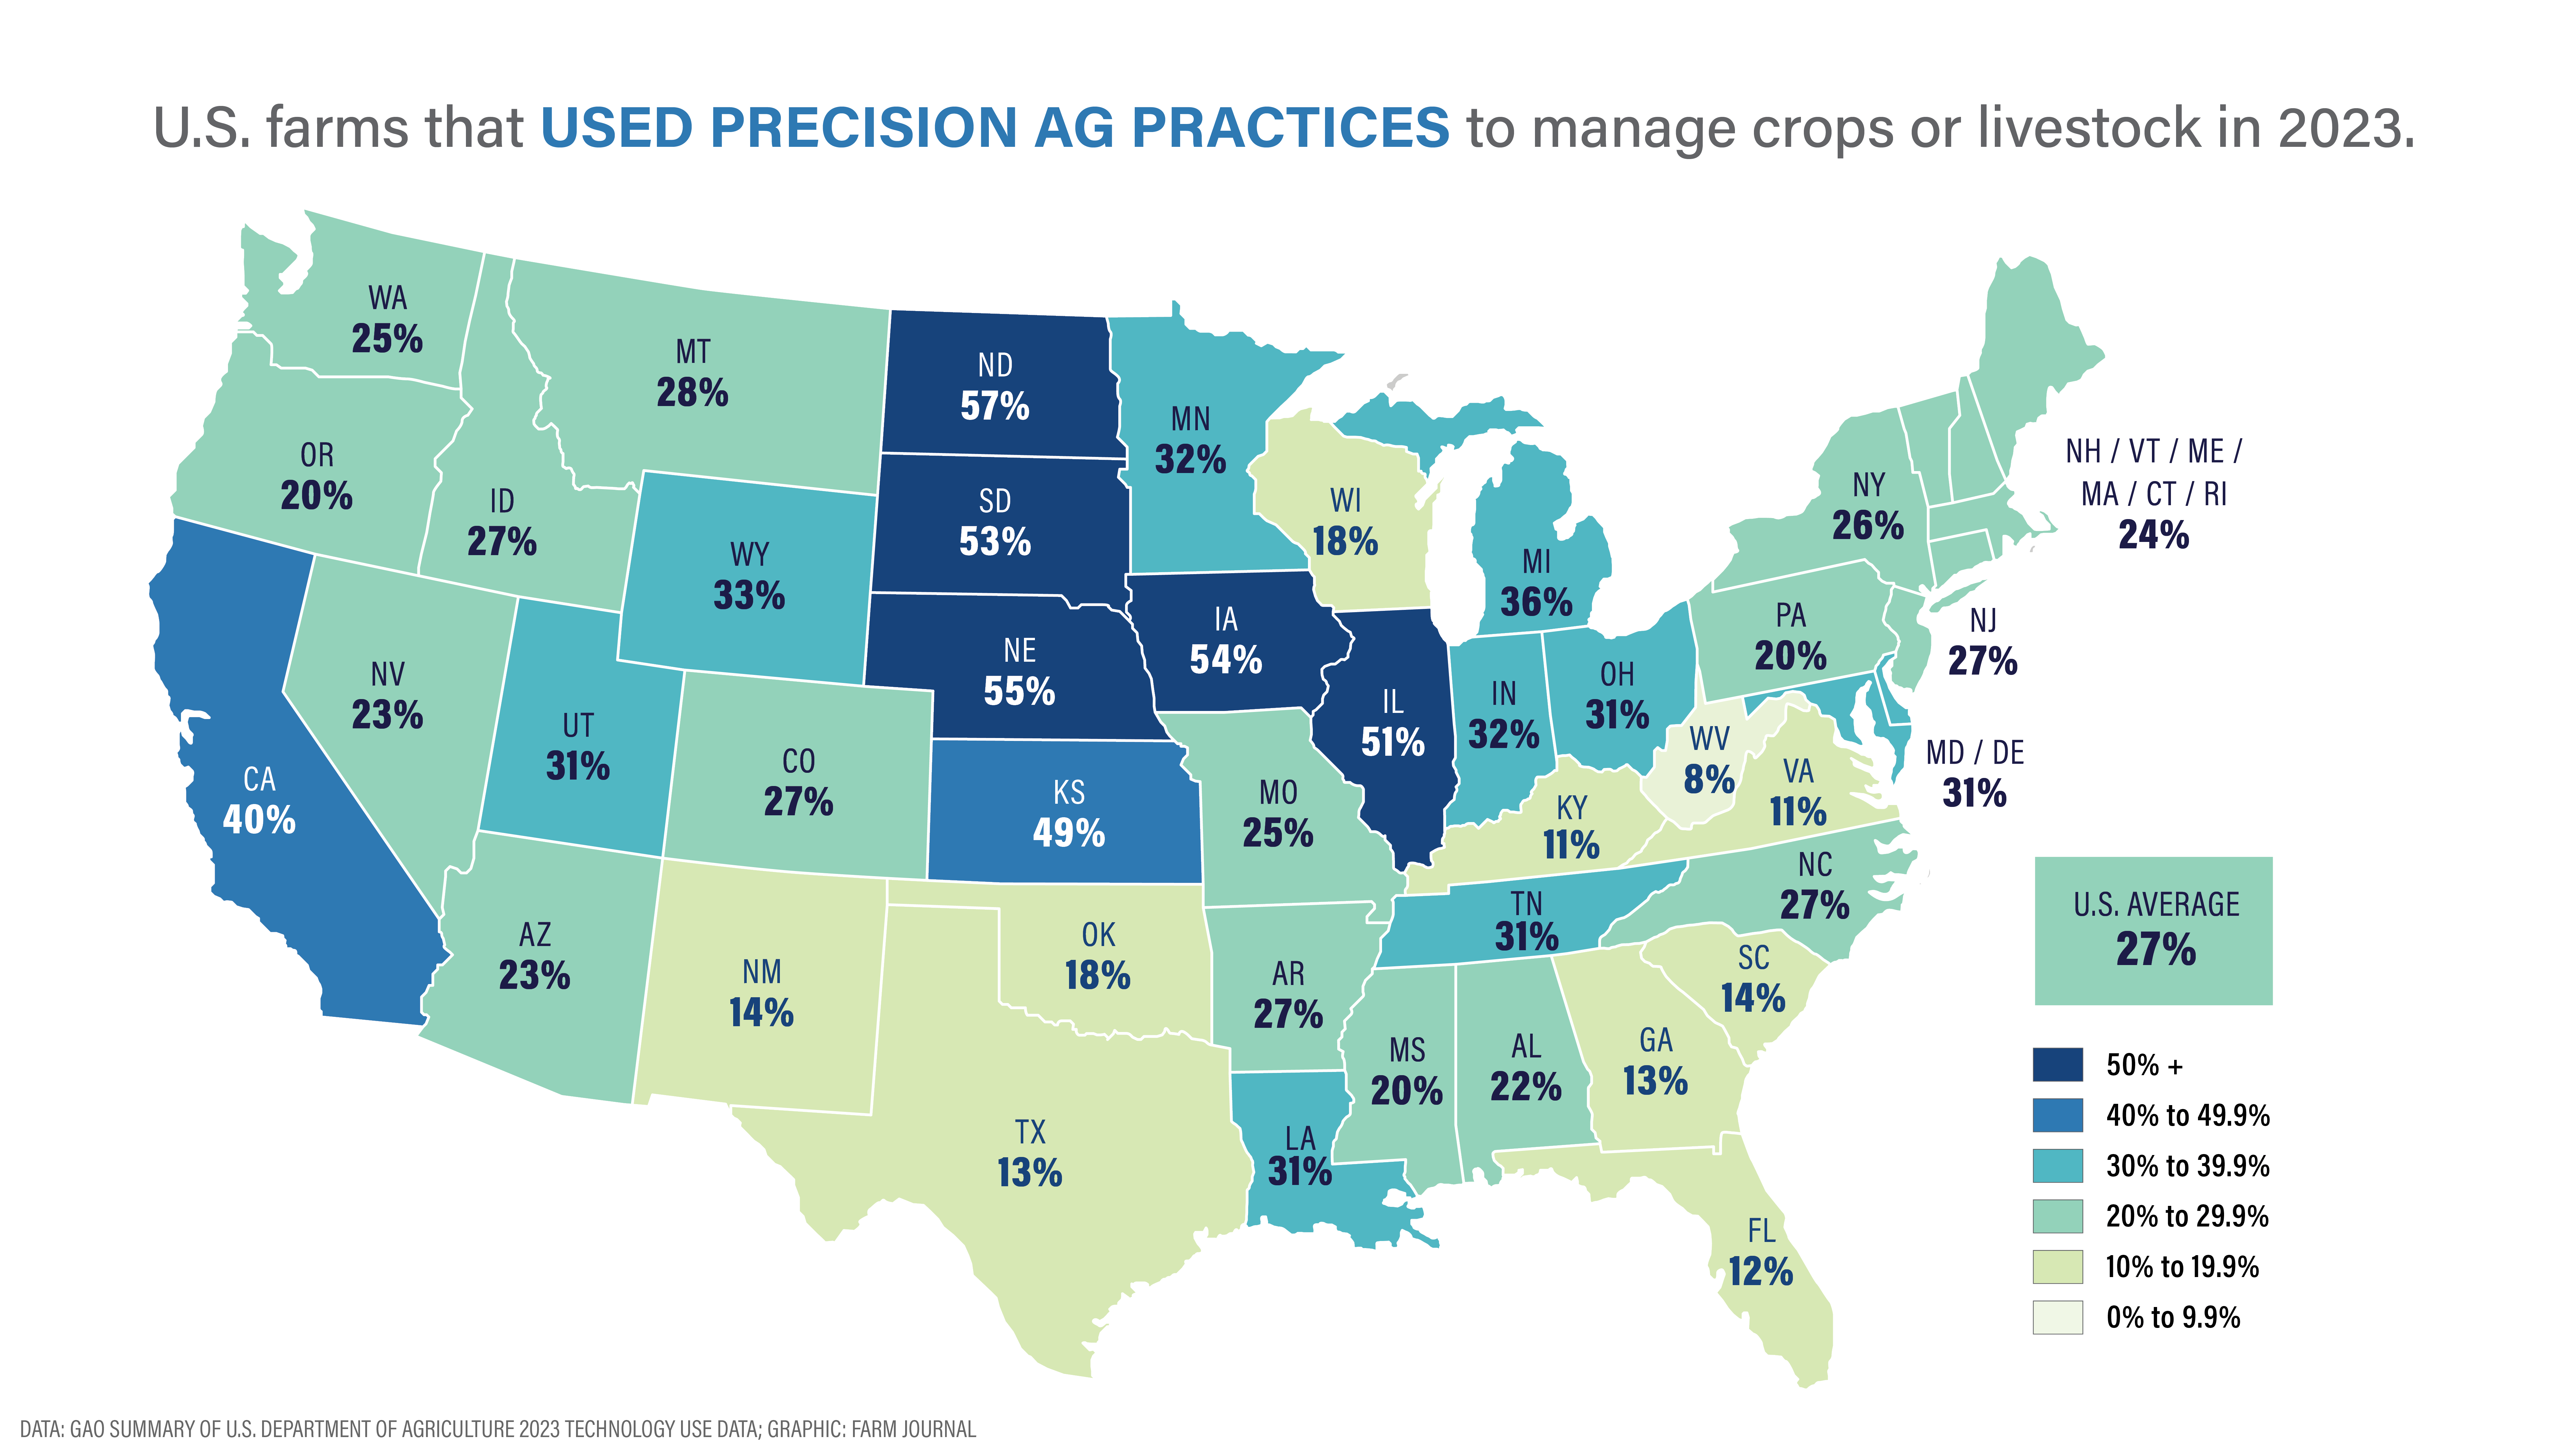 Precision Ag by State